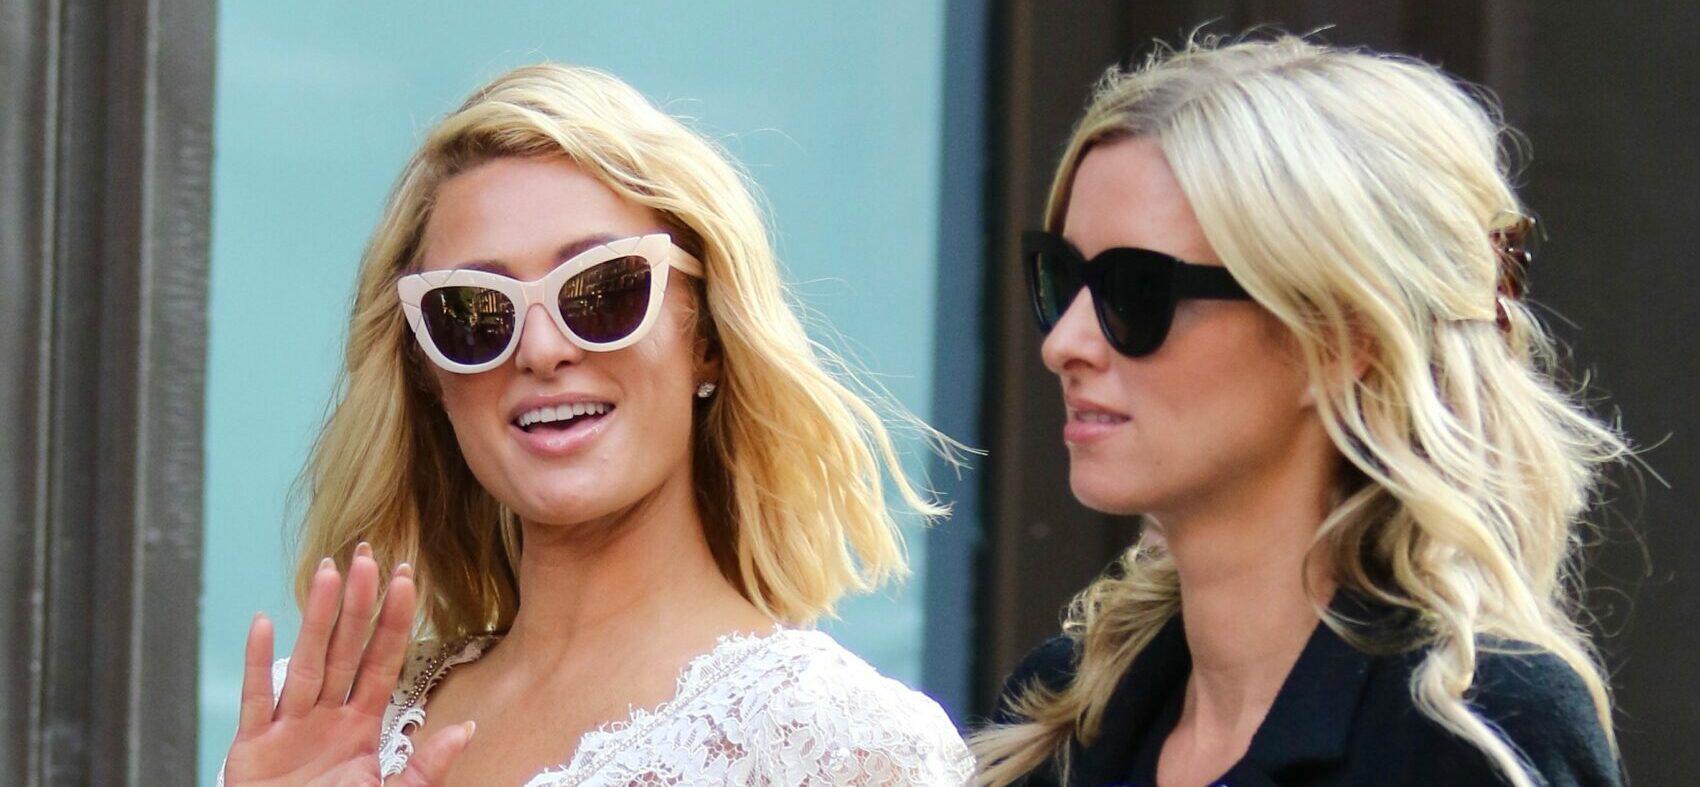 Paris and Nicky Hilton in NYC